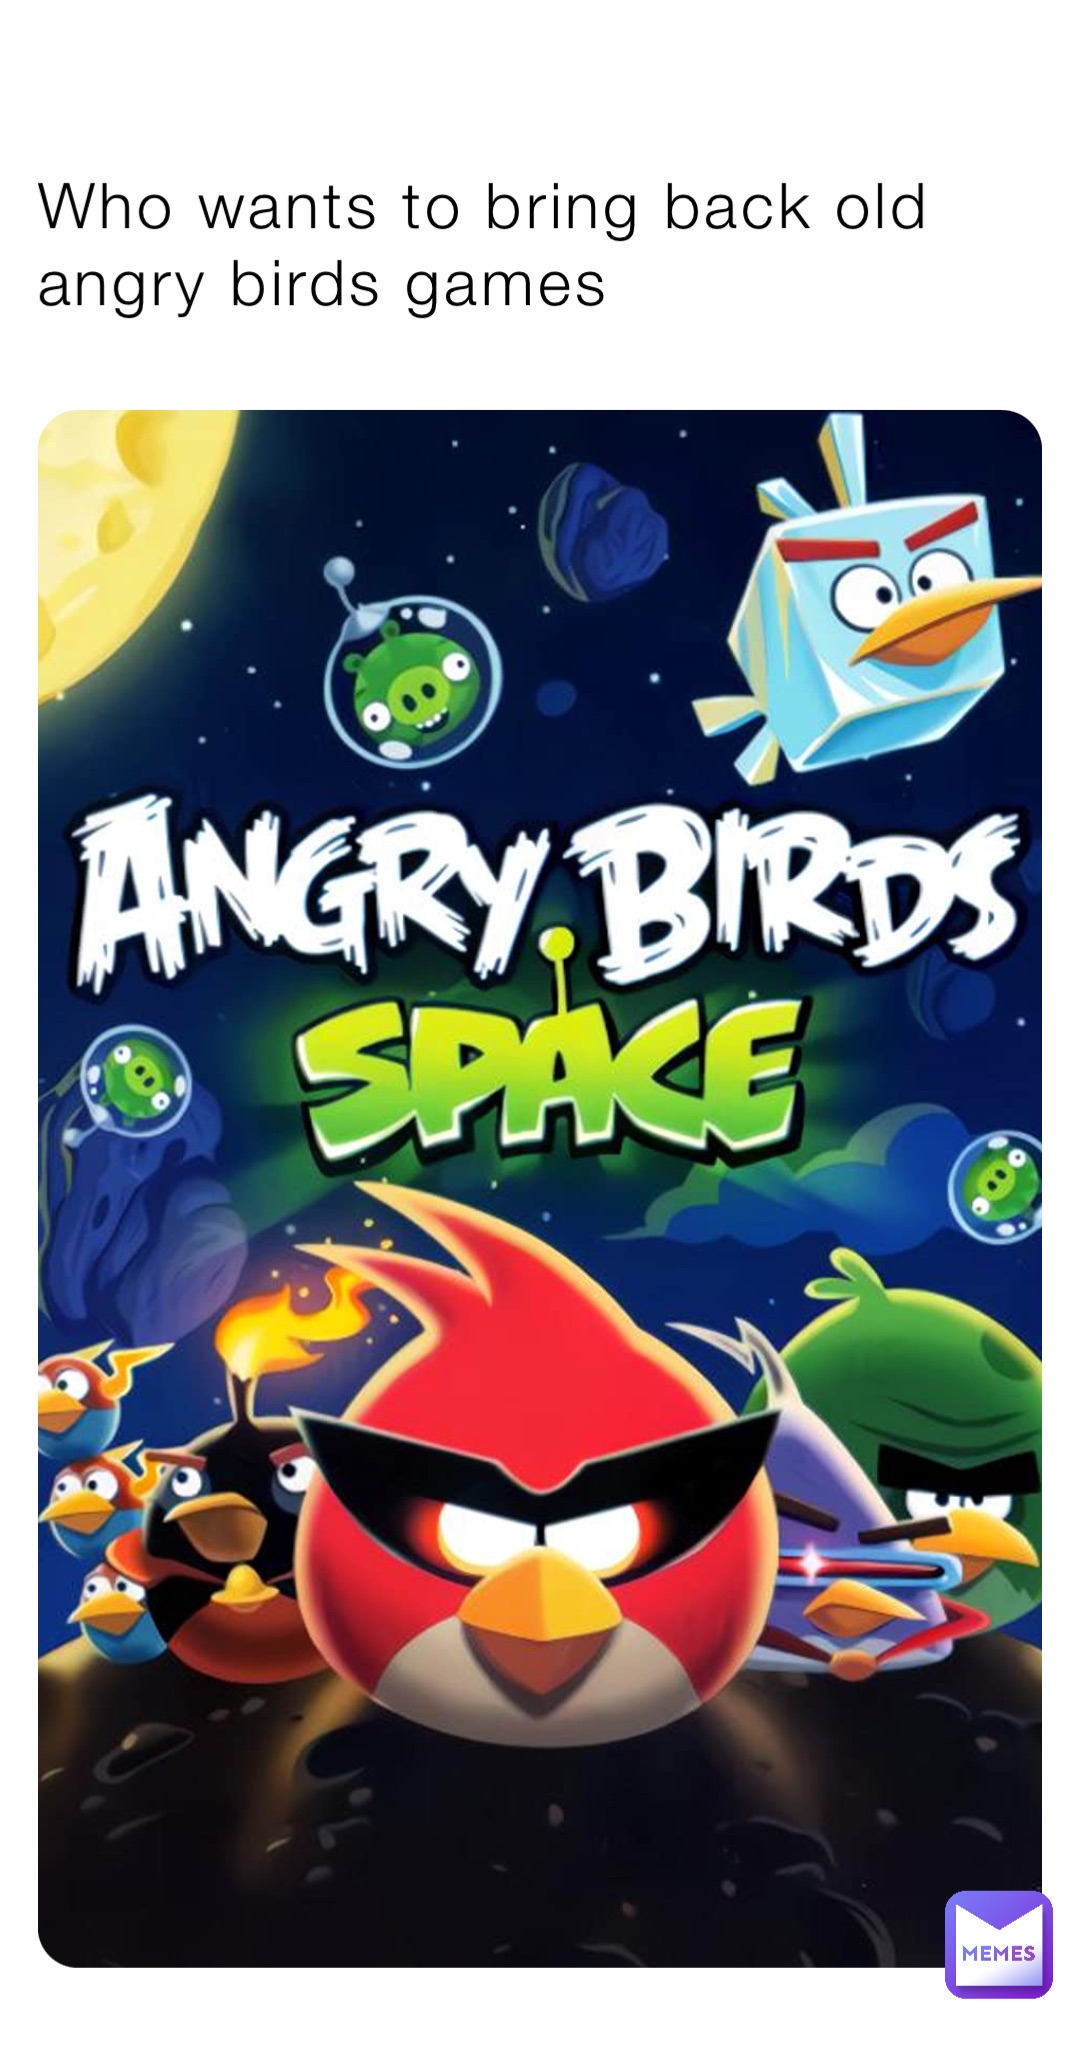 Who wants to bring back old angry birds games